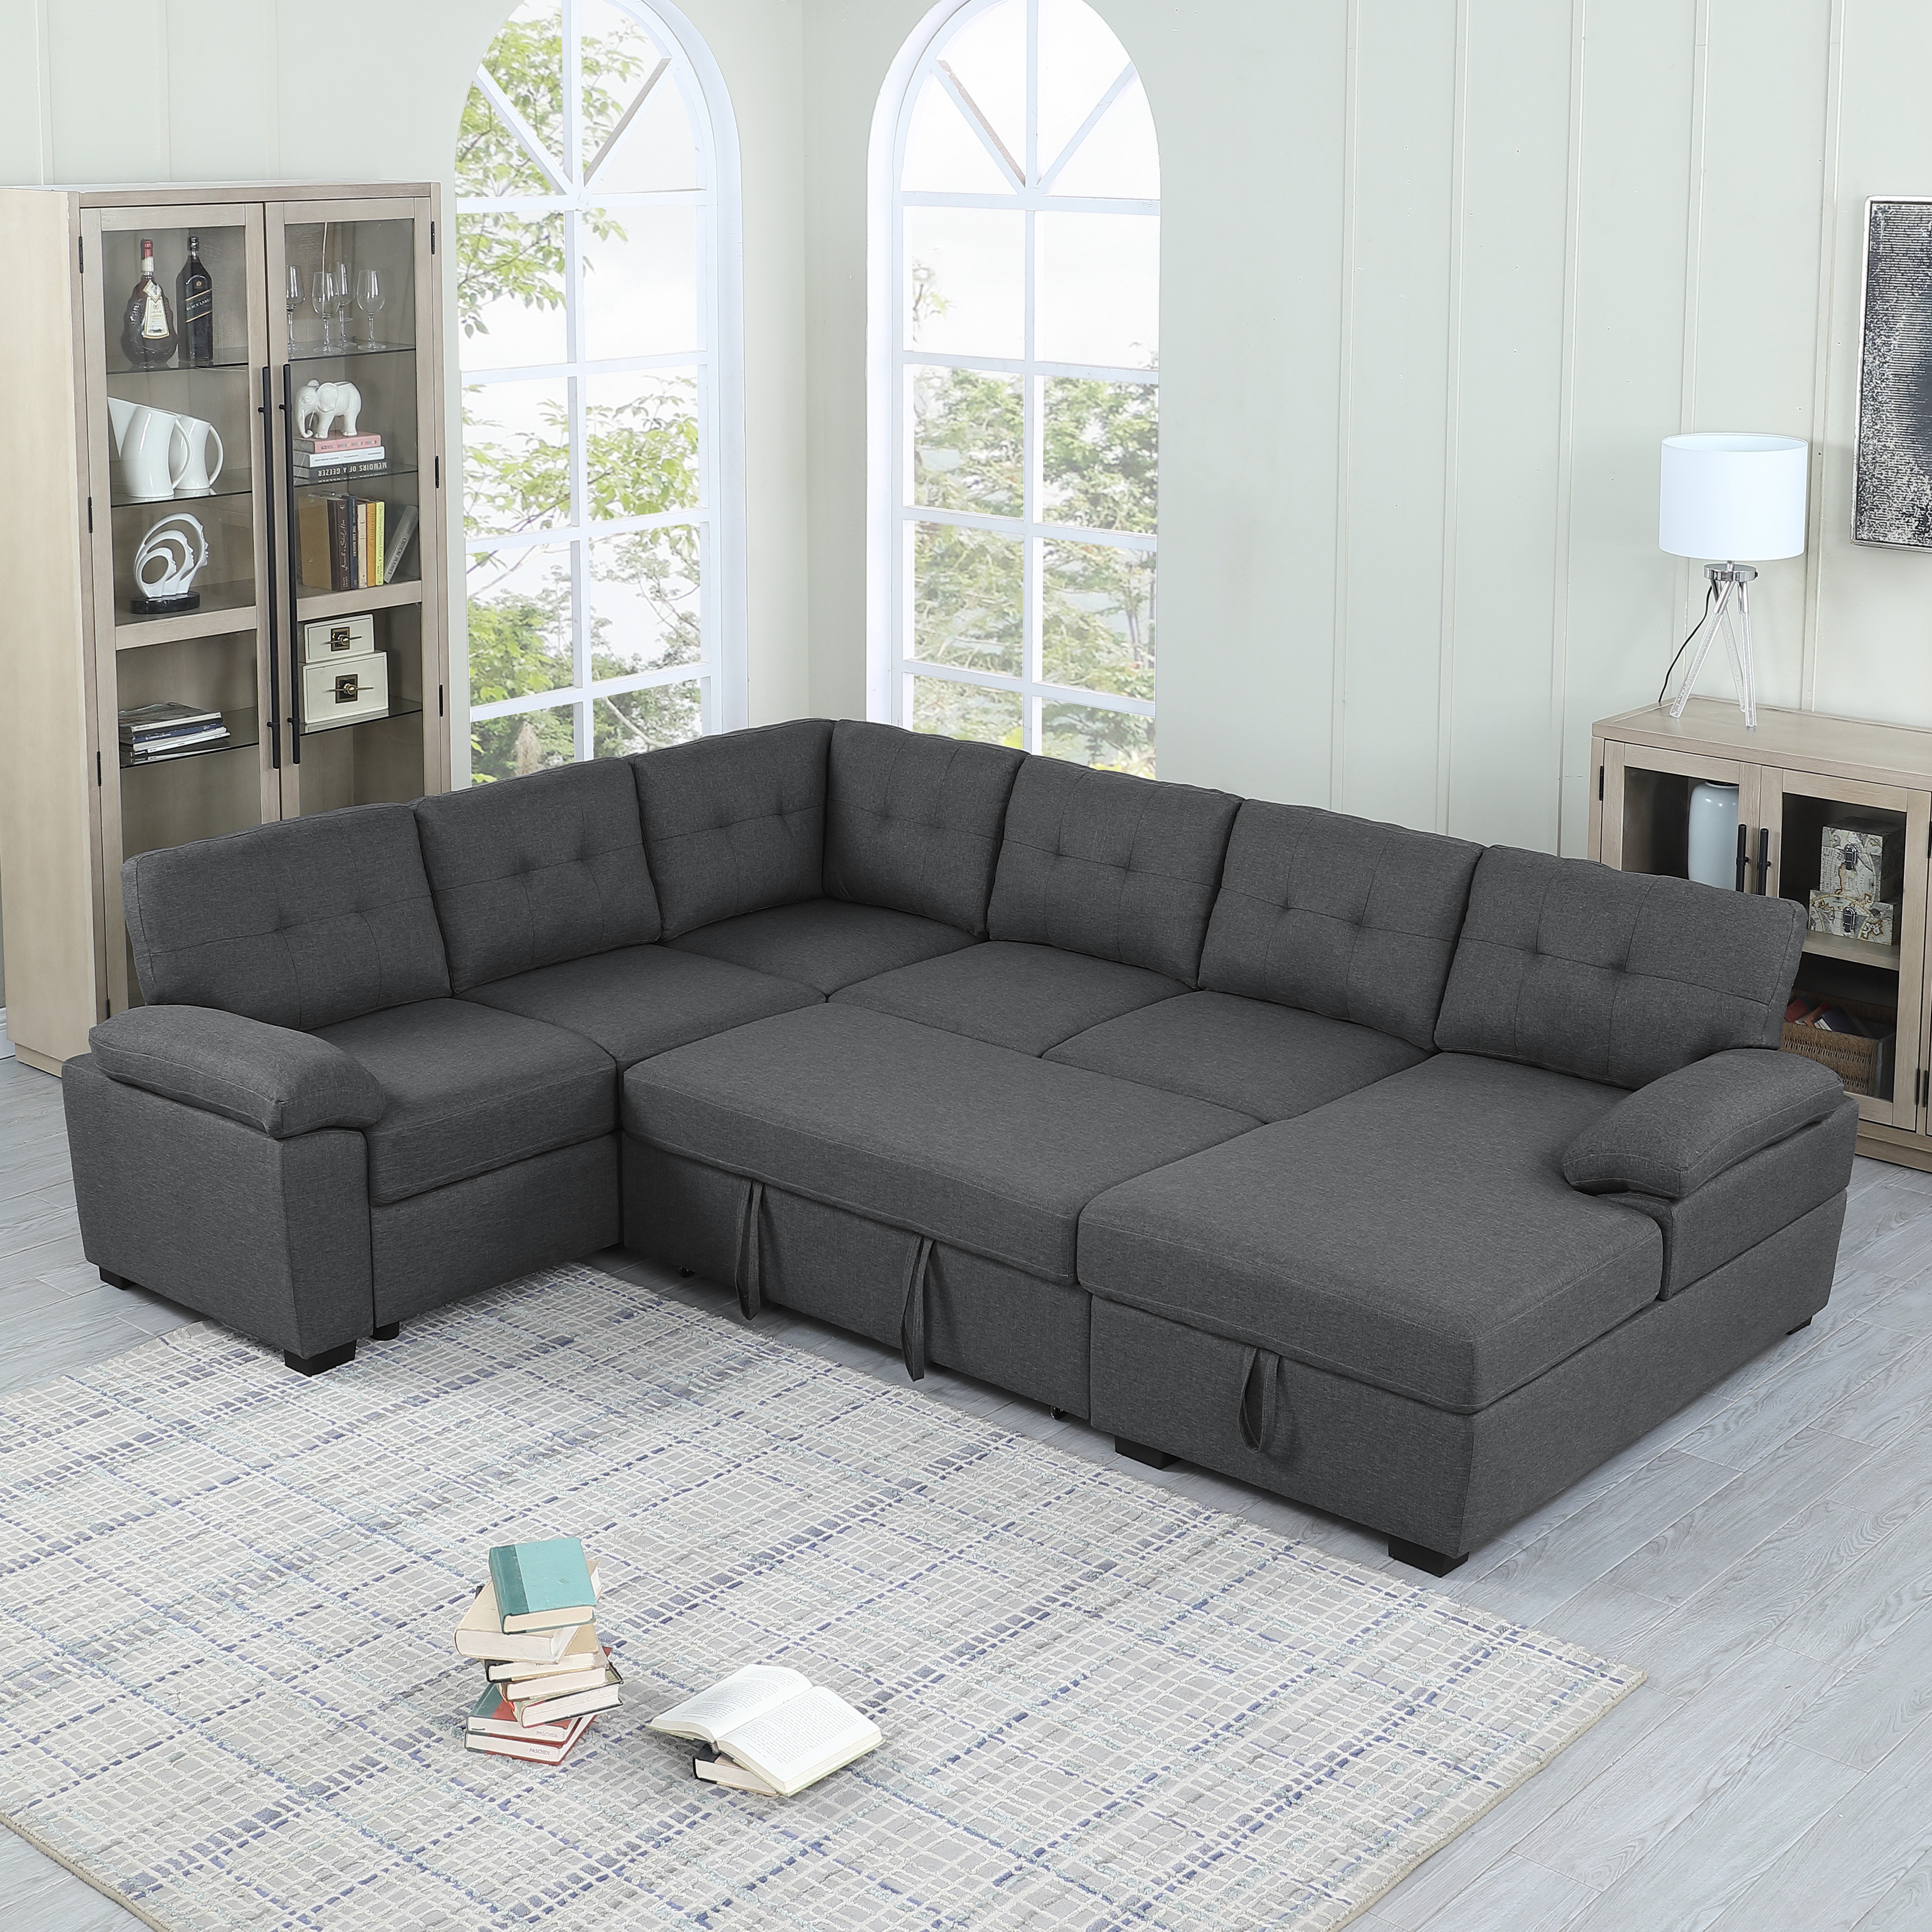 Sectional Couch With Pull Out Bed